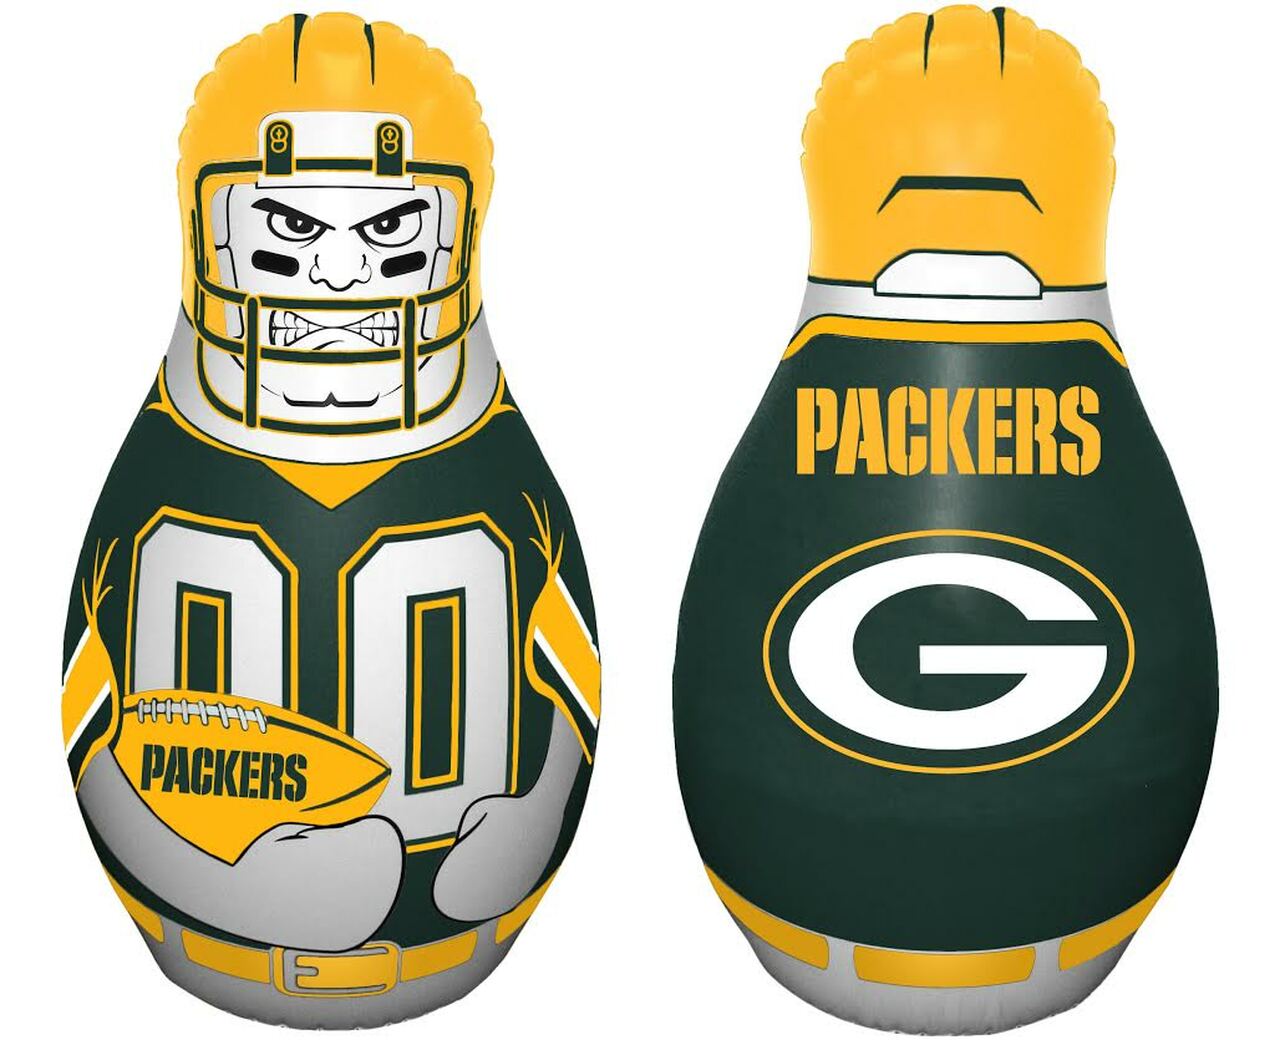 Kids inflatable toy punching bag with Green Bay Packers football player graphics